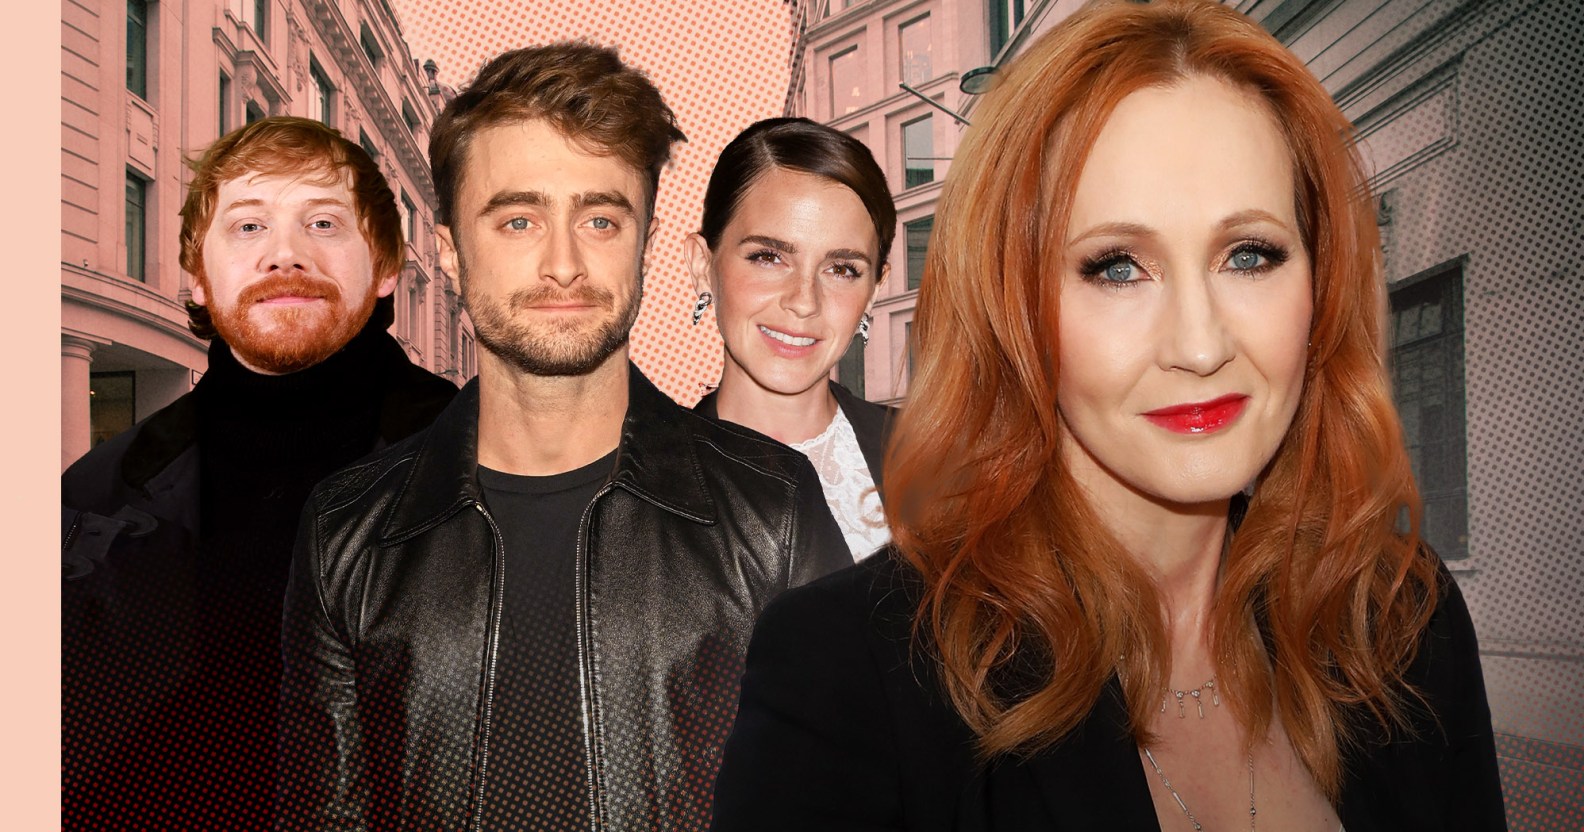 Harry Potter actors Rupert Grint, Daniel Radcliffe and Emma Watson superimposed next to author JK Rowling